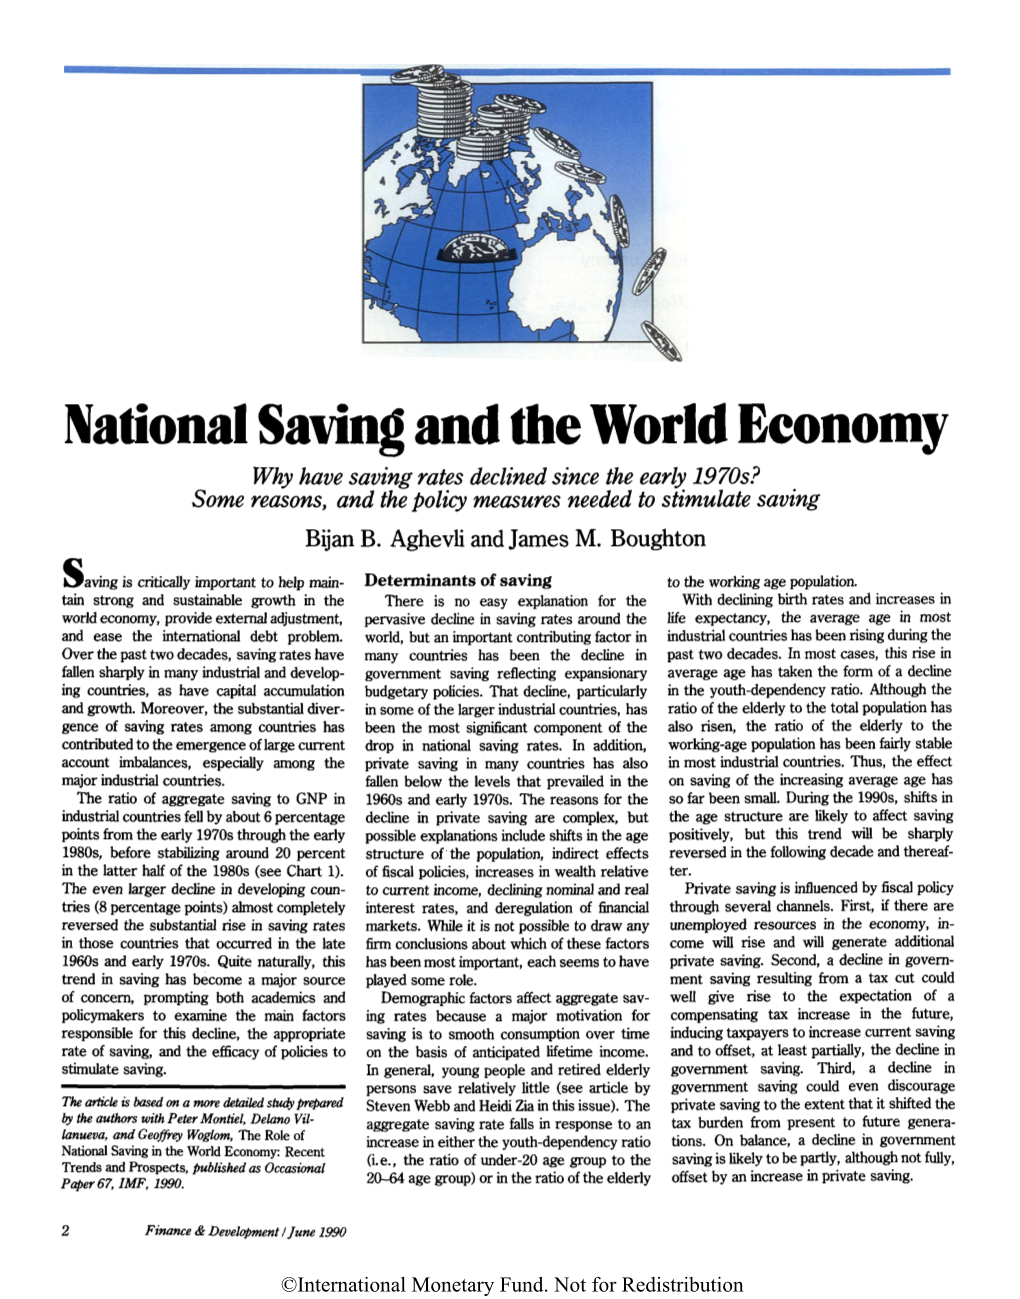 National Saving and the World Economy Why Have Saving Rates Declined Since the Early 1970S? Some Reasons, and the Policy Measures Needed to Stimulate Saving Bijan B